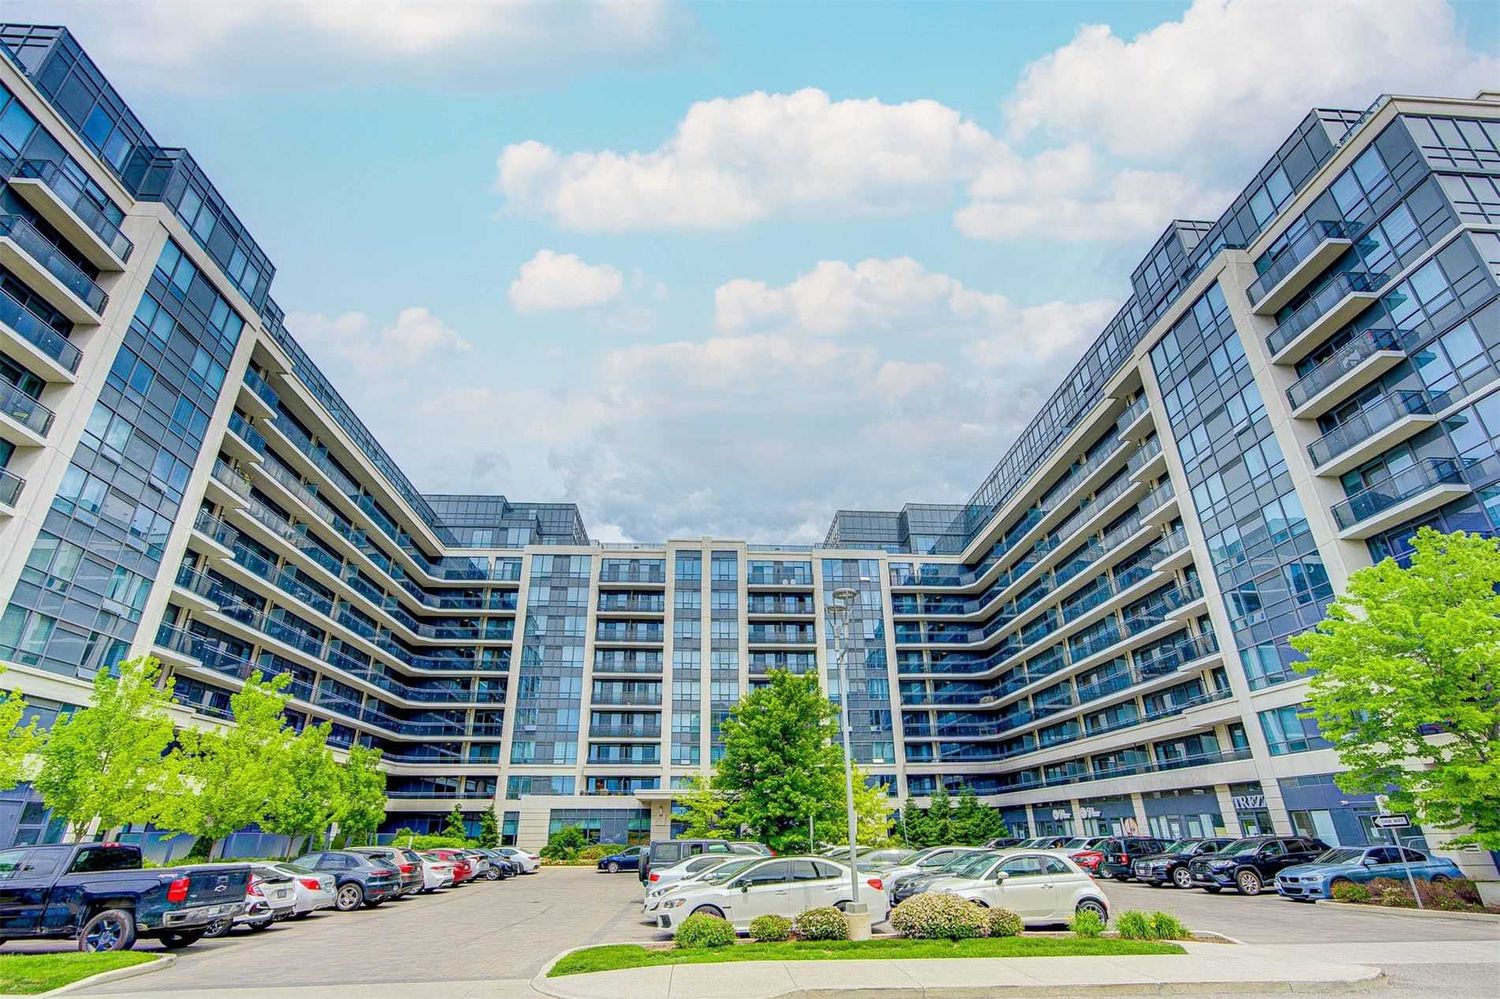 372 Highway 7. Royal Gardens II Condos is located in  Richmond Hill, Toronto - image #1 of 3